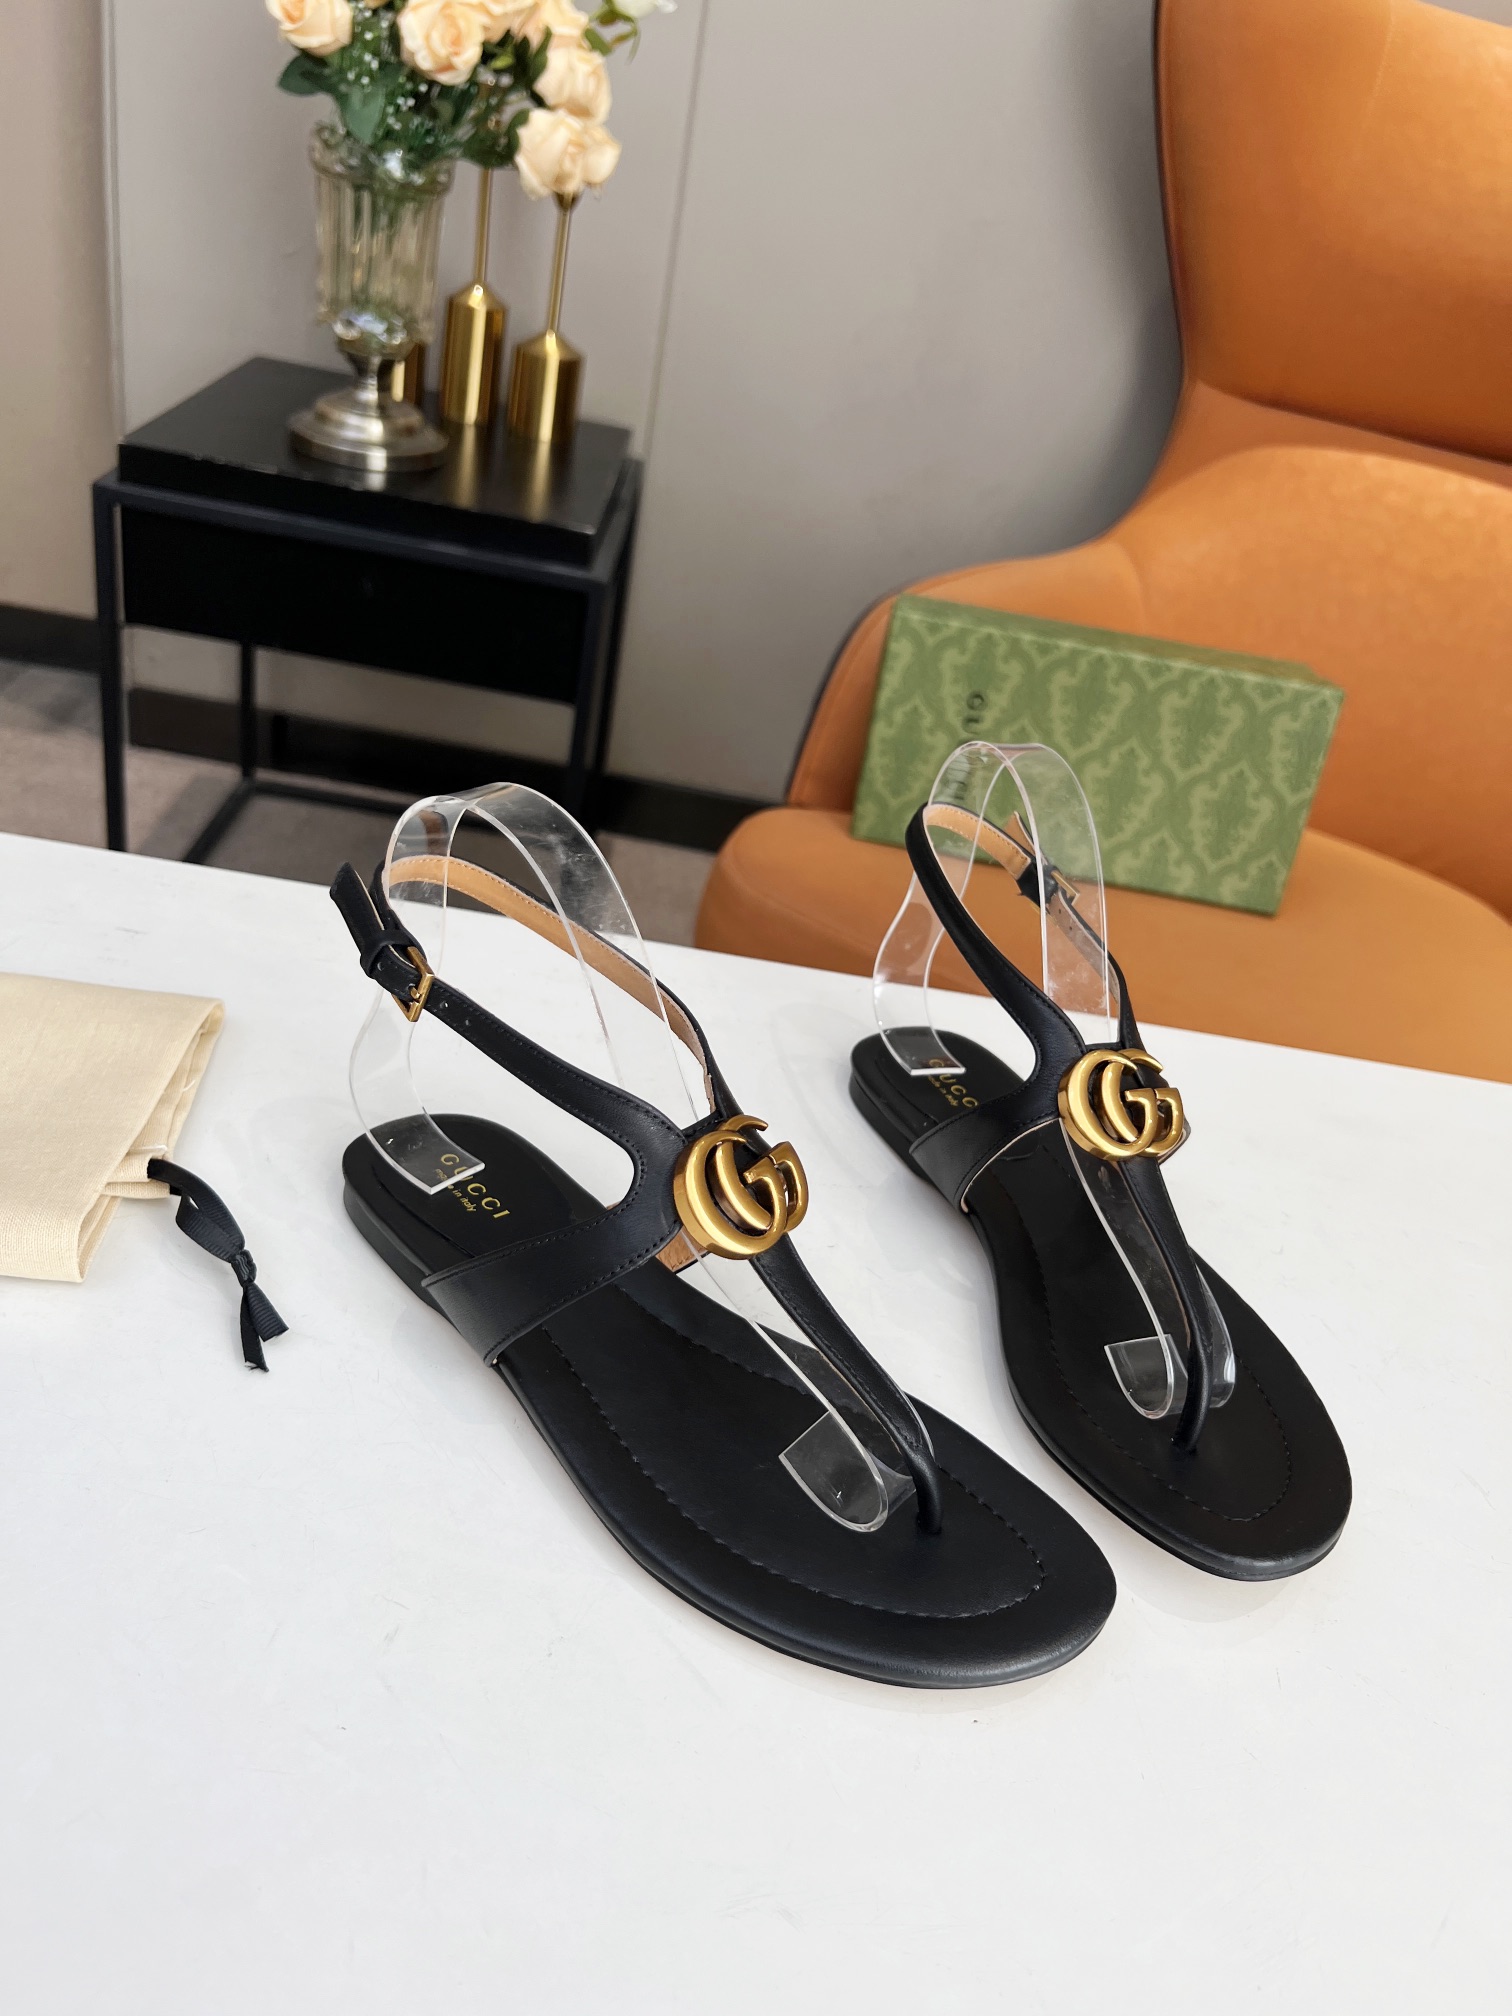 Gucci Double G Double G leather thong sandals For Women # 268964, cheap Gucci Slippers, only $65!